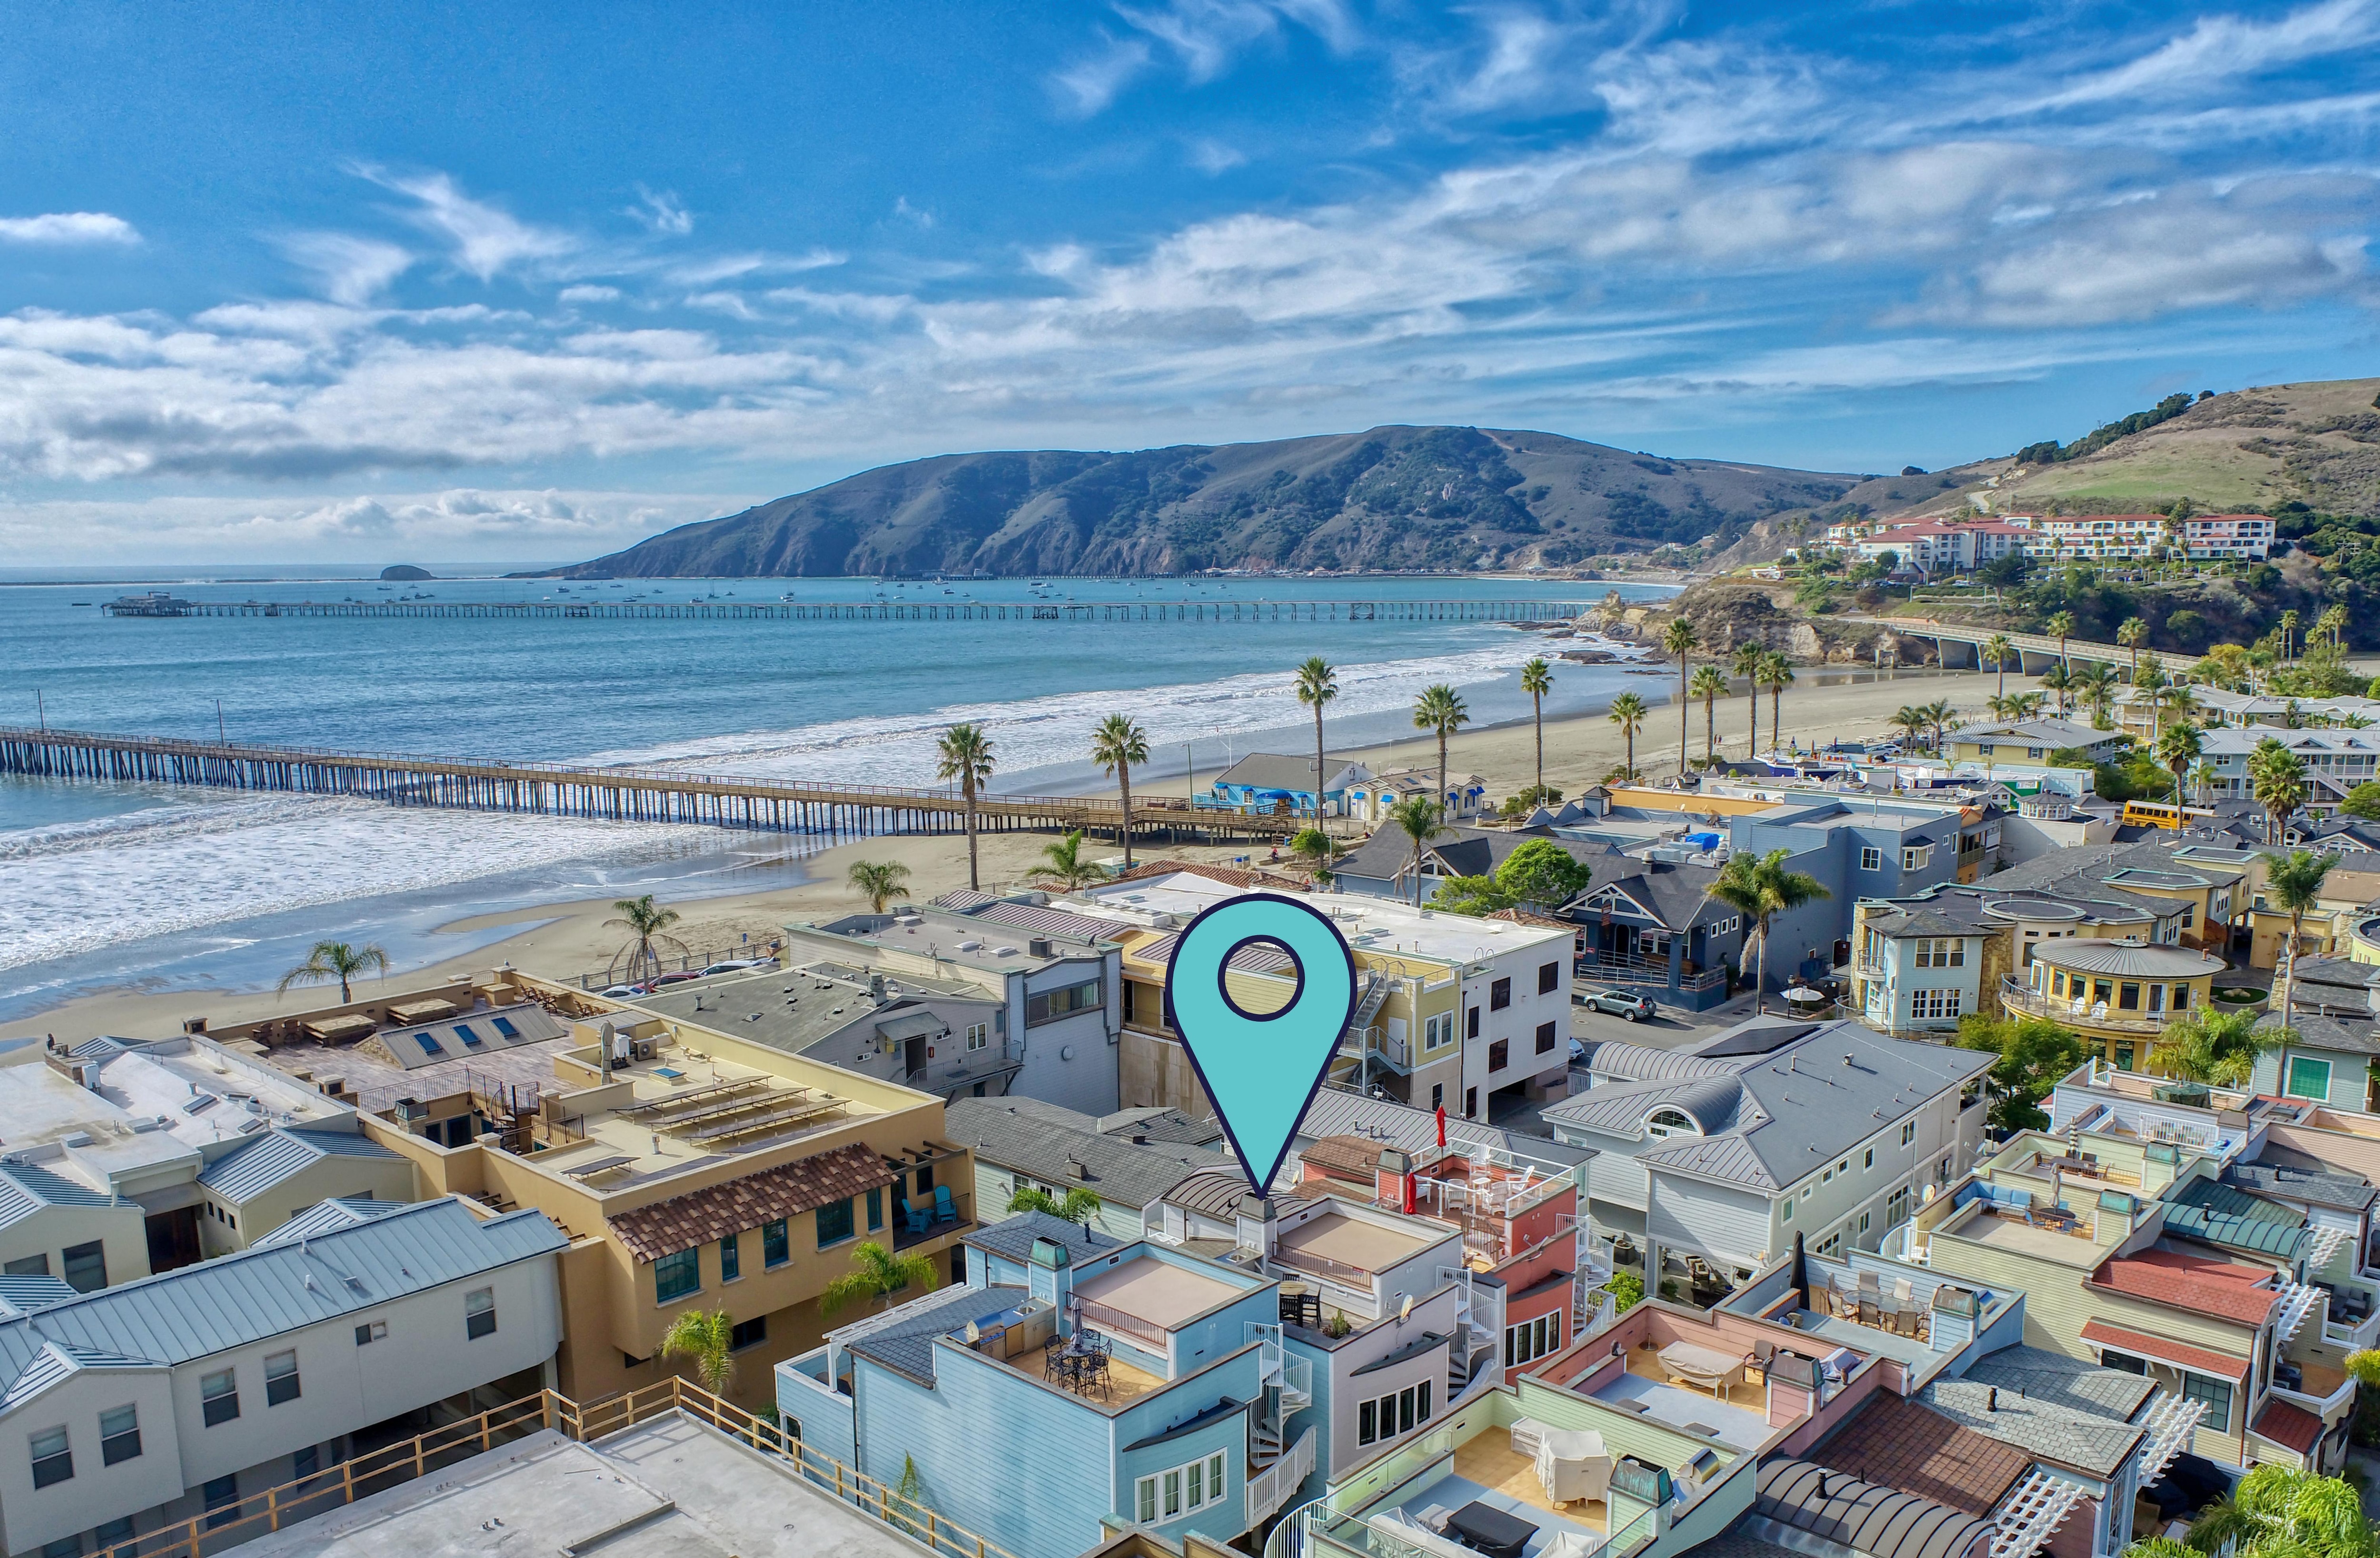 Avila Tide, an ideal spot for couples or family getaways, enjoys a central location near beach activities, Avila Beach Pier, dining options, Avila Beach Golf Resort, and the Bob Jones walking and bike trail. Once you're here, there's no need for a car—your